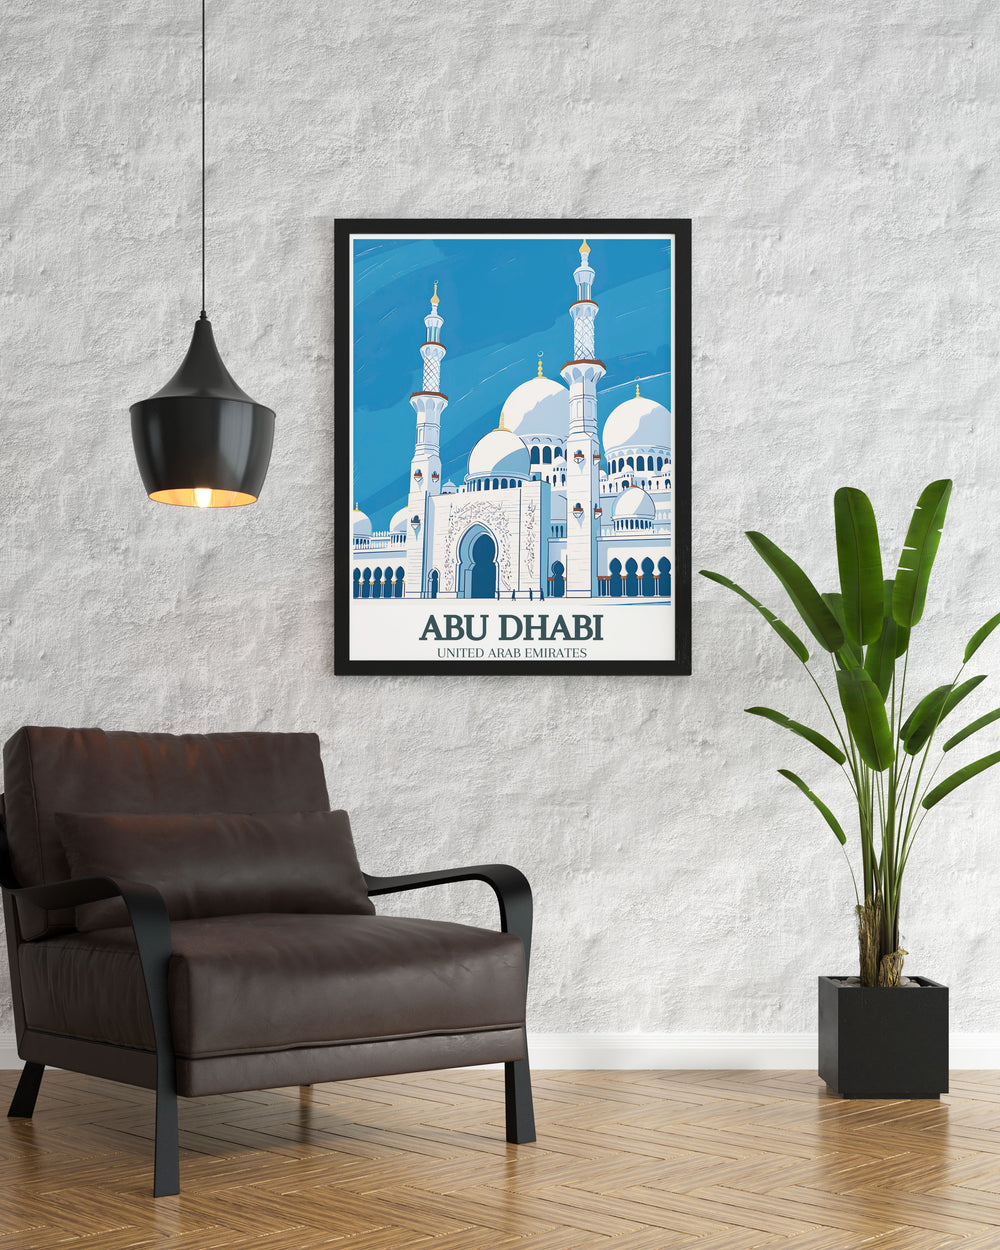 Beautiful poster of the Sheikh Zayed Grand Mosque, Al Rawdah in Abu Dhabi. This vintage print showcases the mosques grandeur and is a great addition to your home decor. Perfect as a unique gift for those who love Abu Dhabi and the United Emirates.